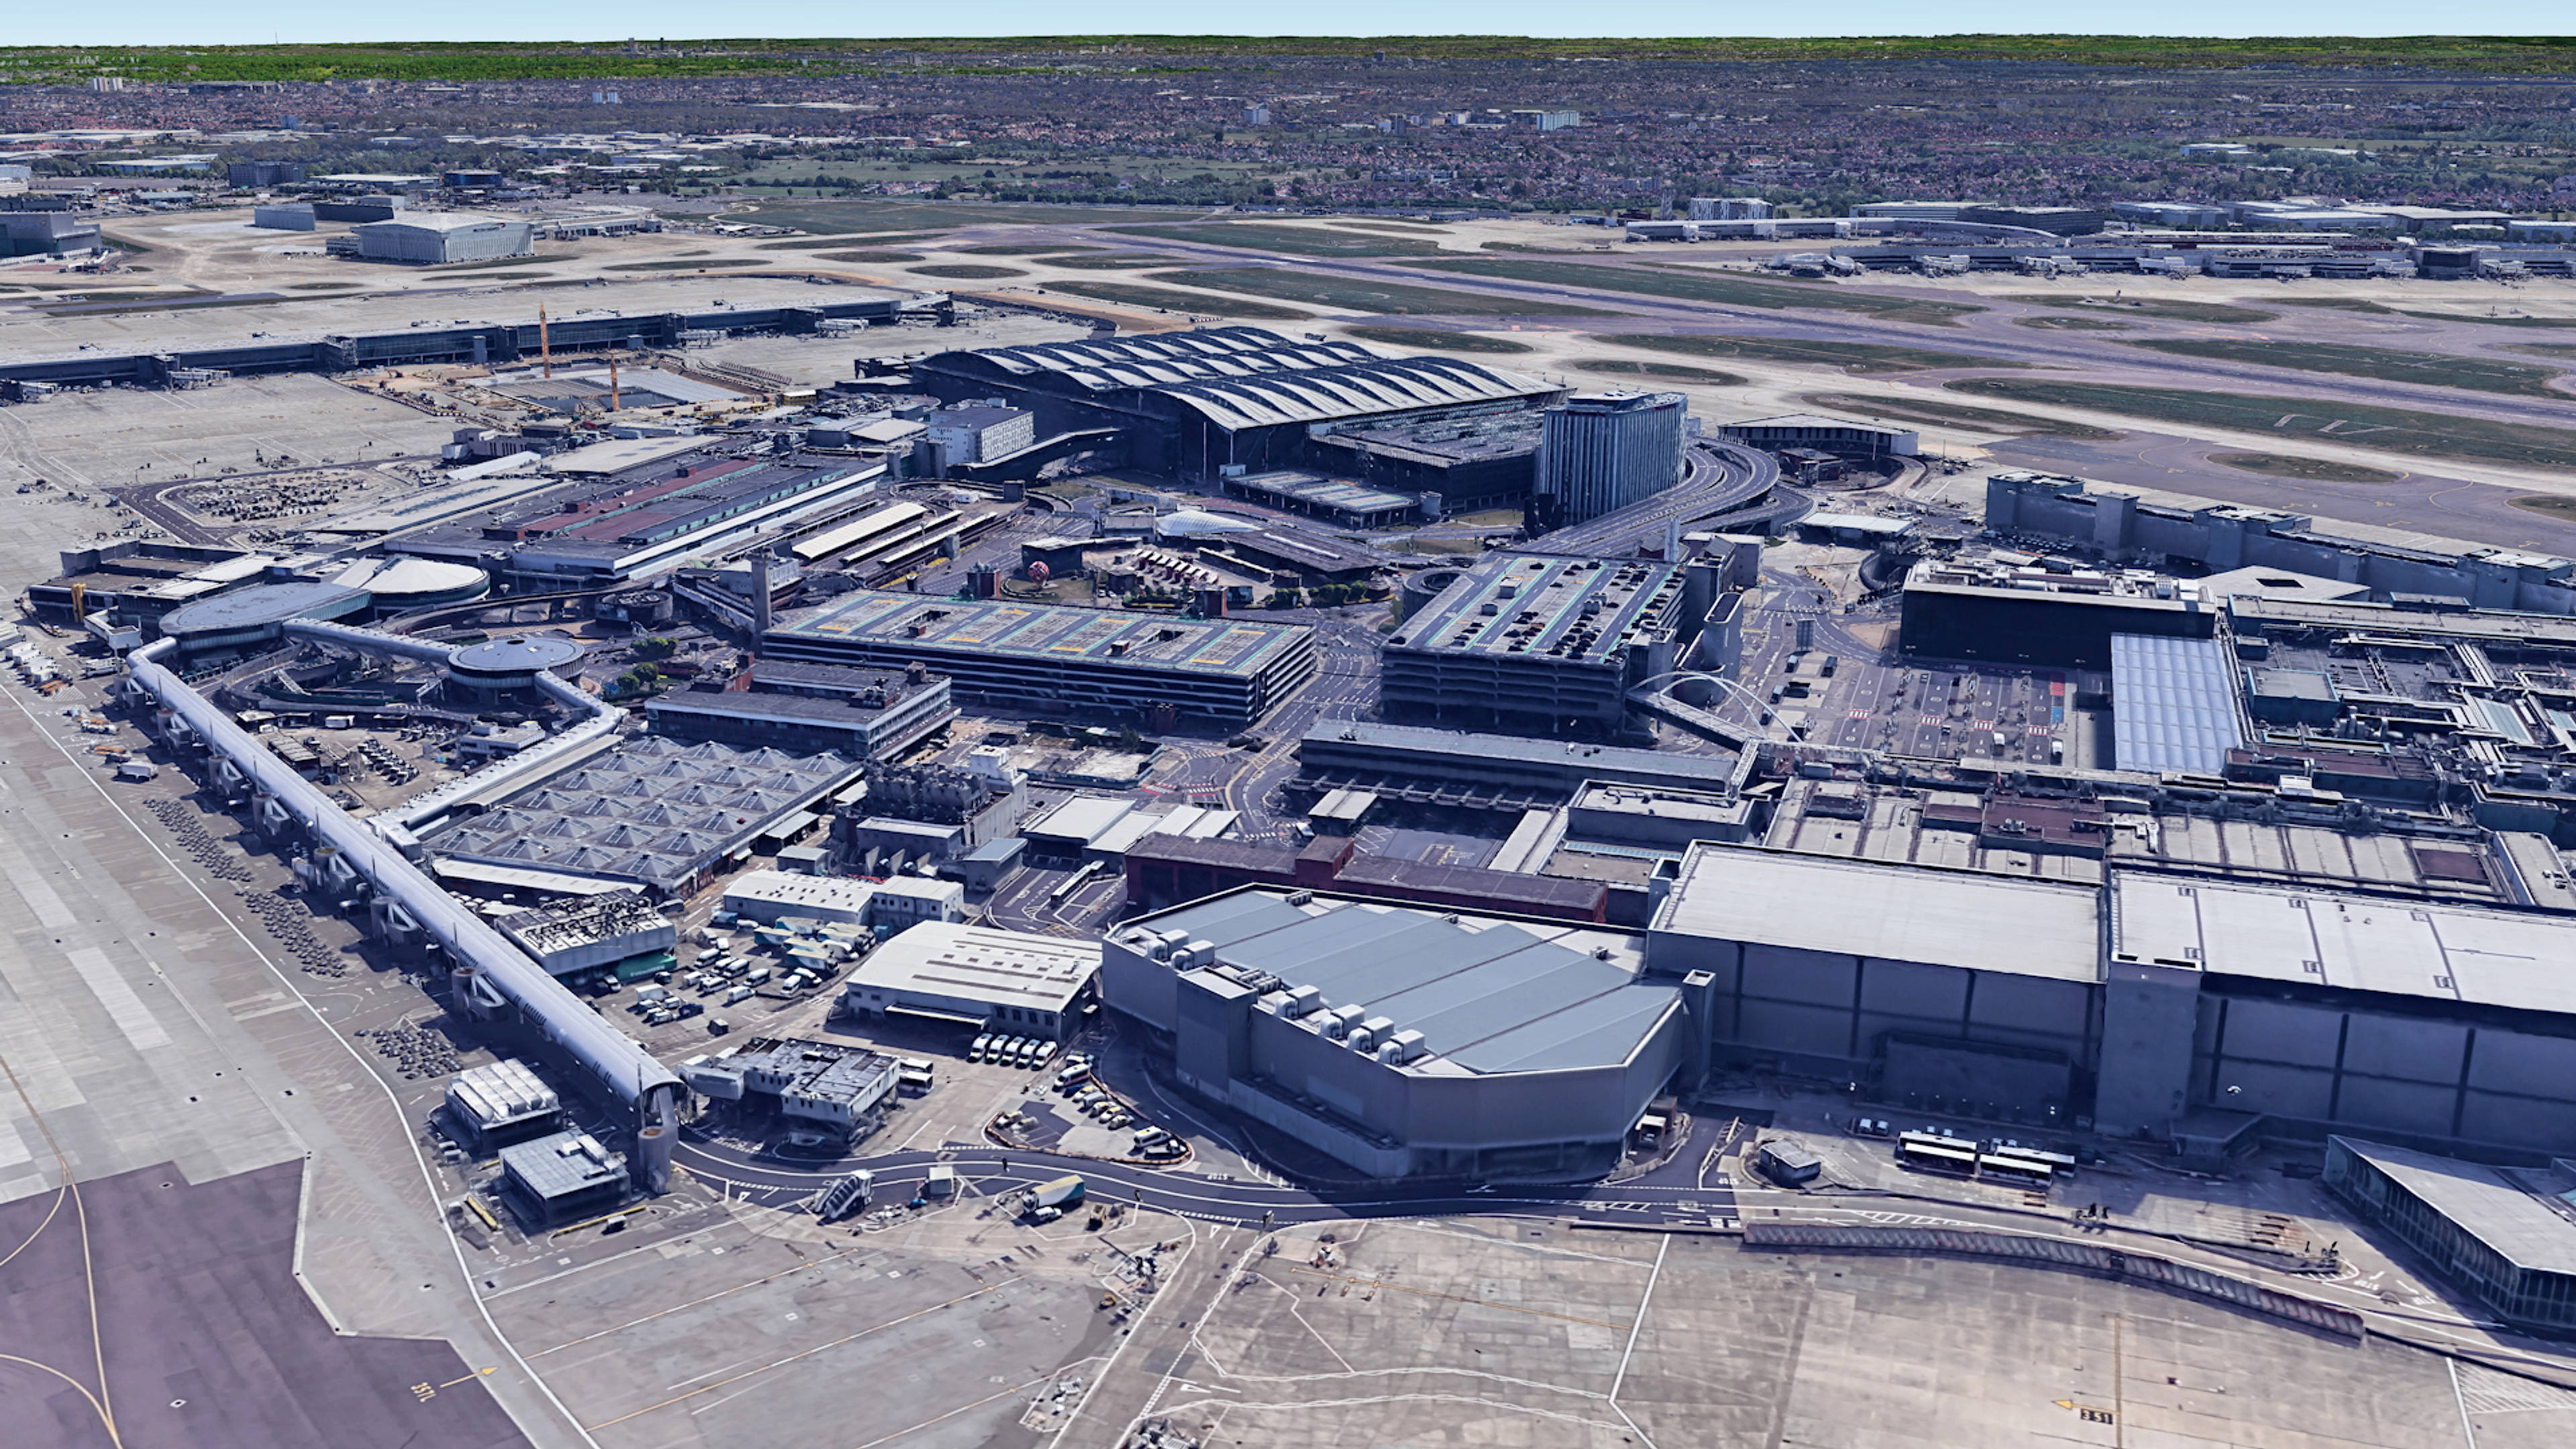 Aerial View of London Heathrow Airport Parking